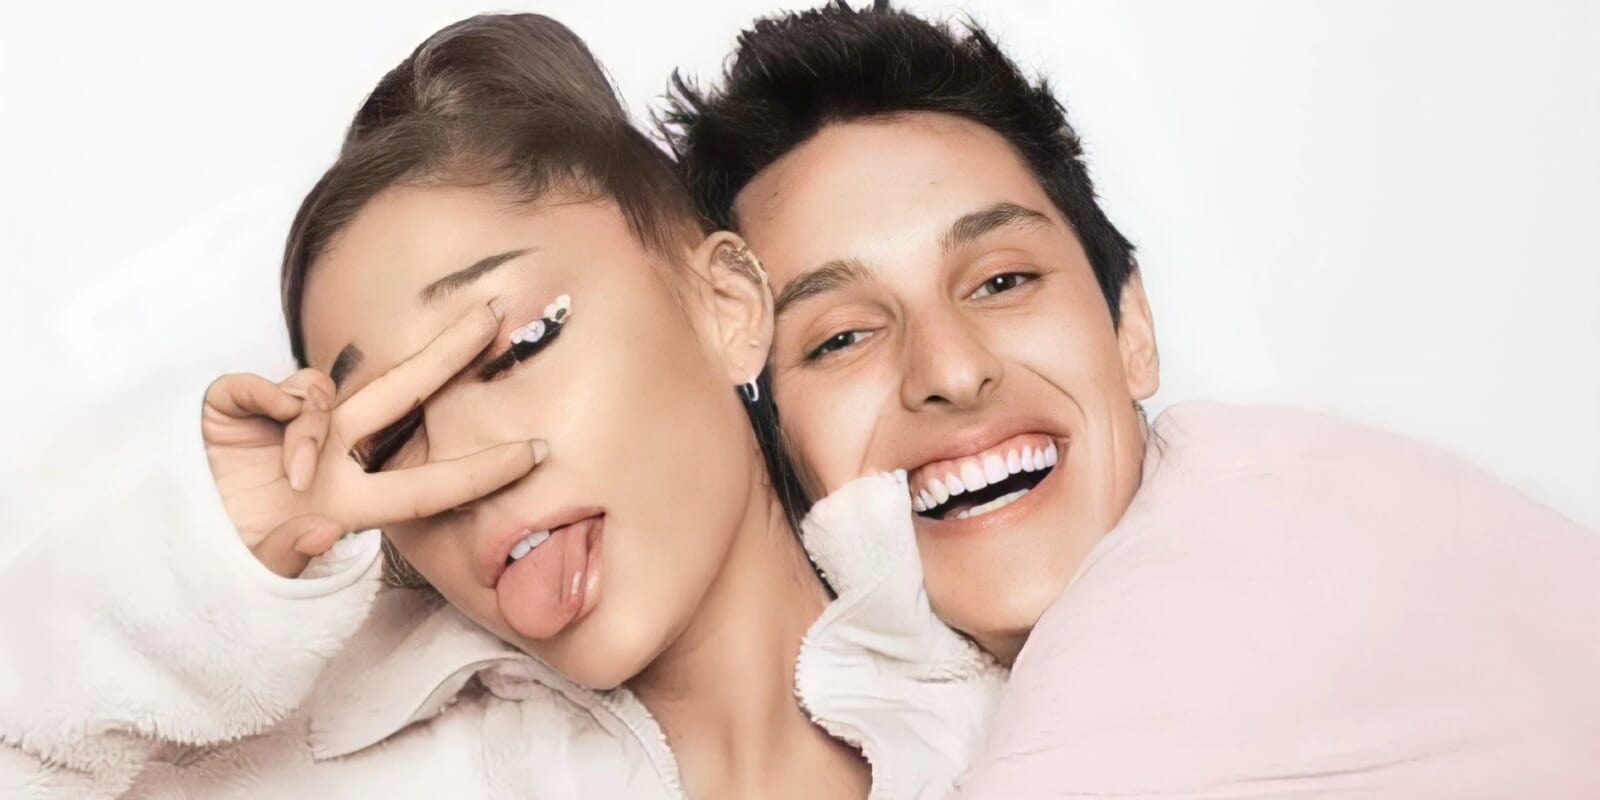 Ariana Grande and Dalton Gomez: A Divorce Fueled by “Irreconcilable Differences”